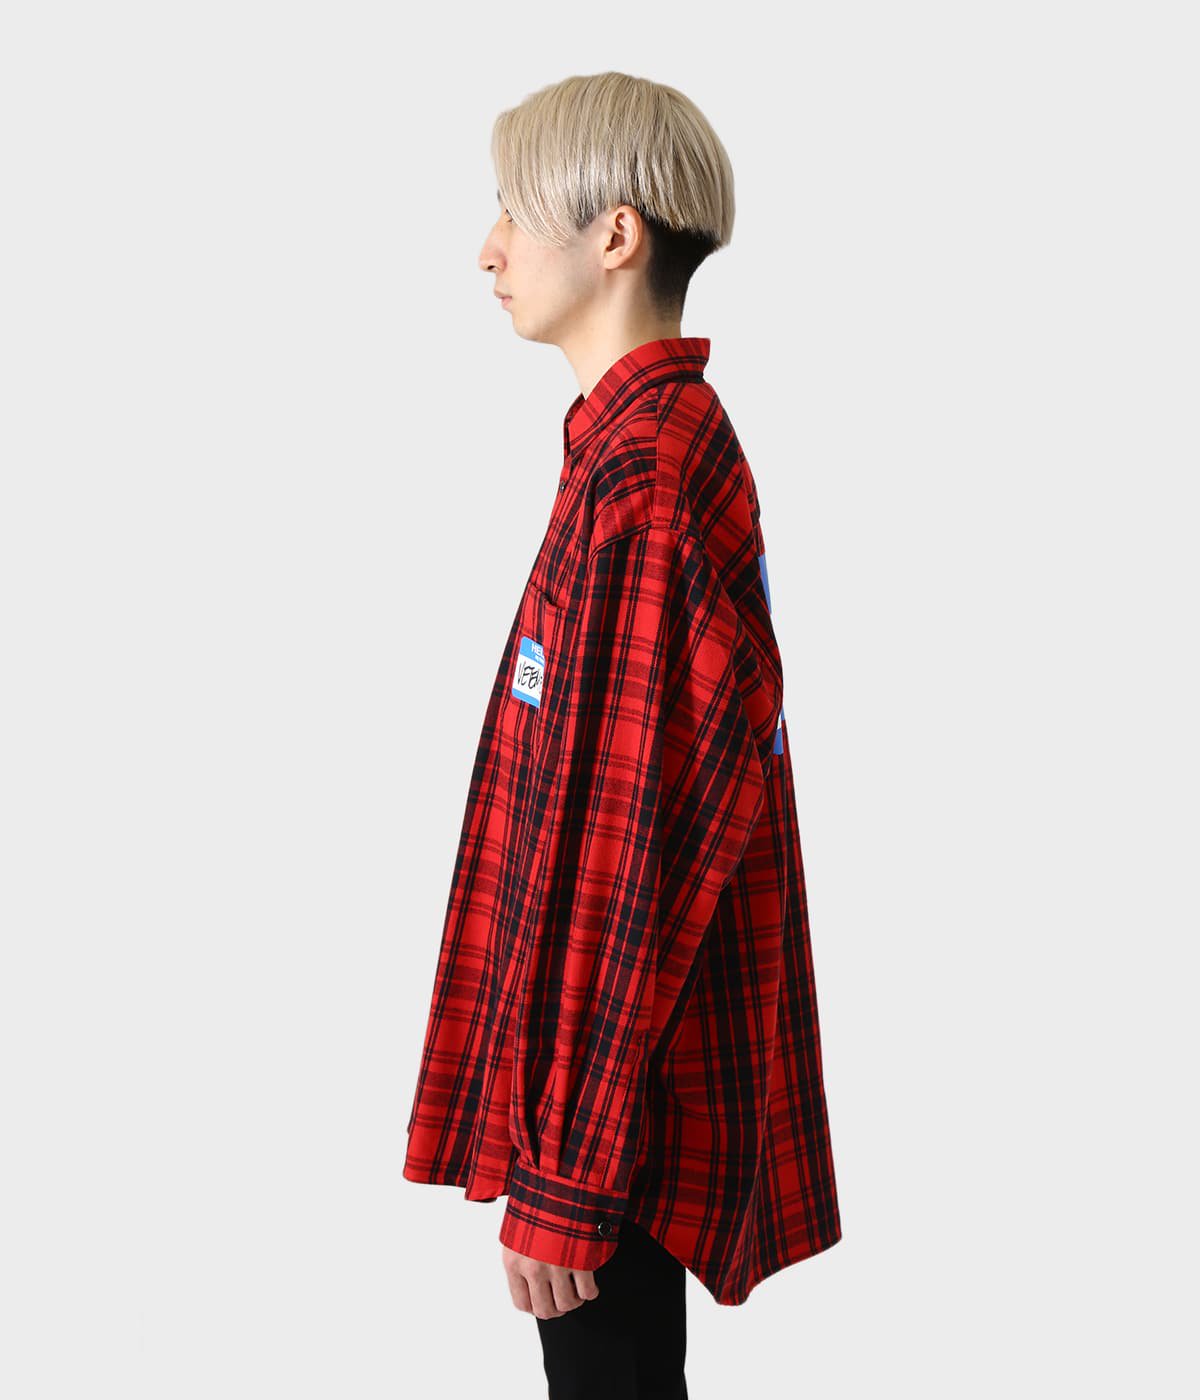 MY NAME IS VETEMENTS FLANNEL SHIRT